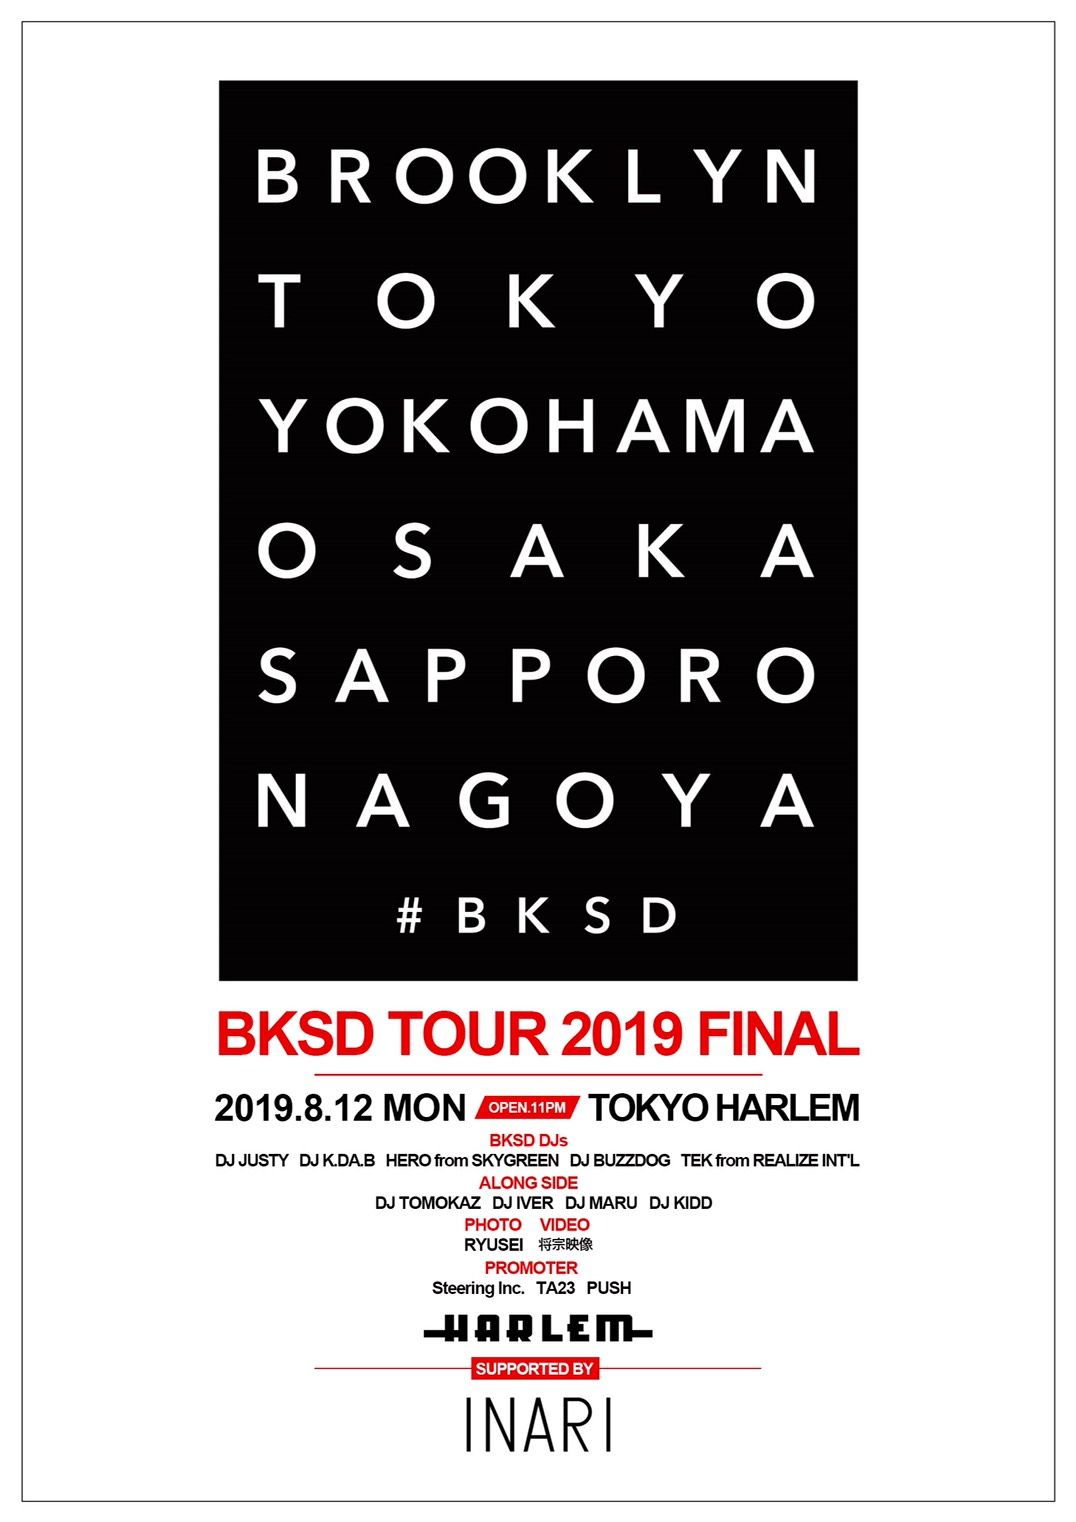 #BKSD 2019 JAPAN TOUR  FINAL -Supported by INARI-